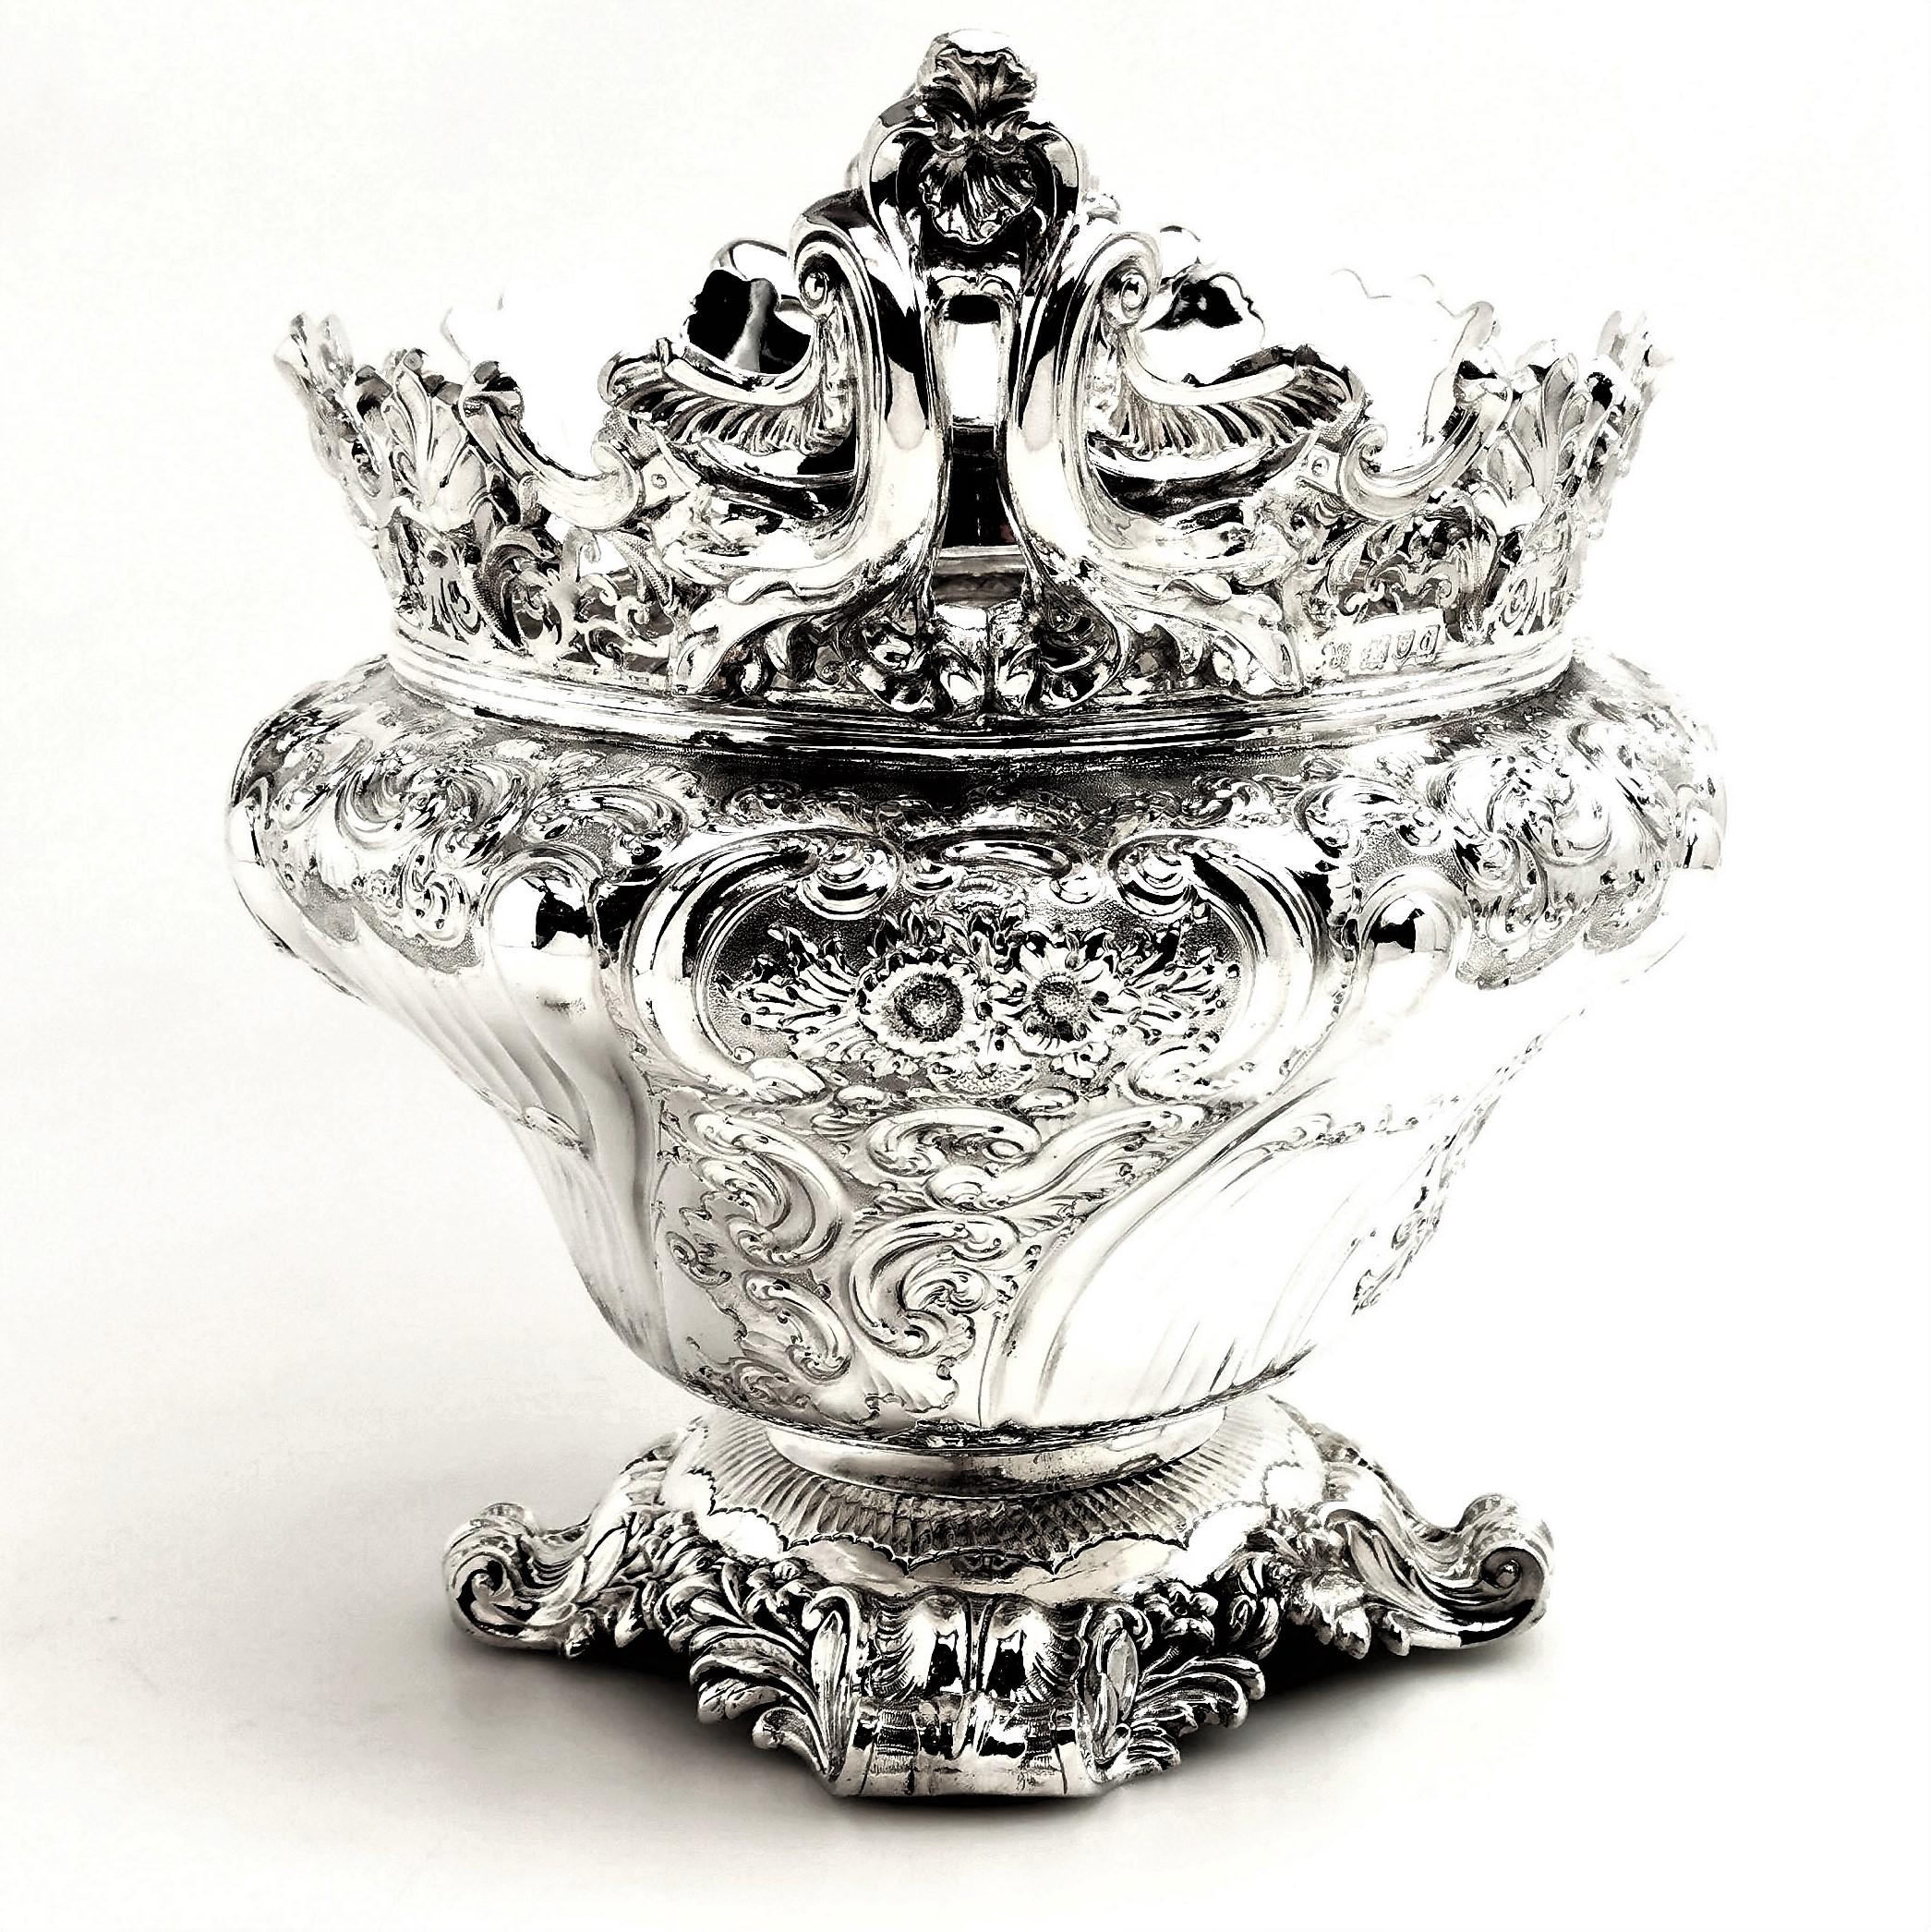 Antique Victorian Sterling Silver Bowl / Dish / Centrepiece, 1899 1